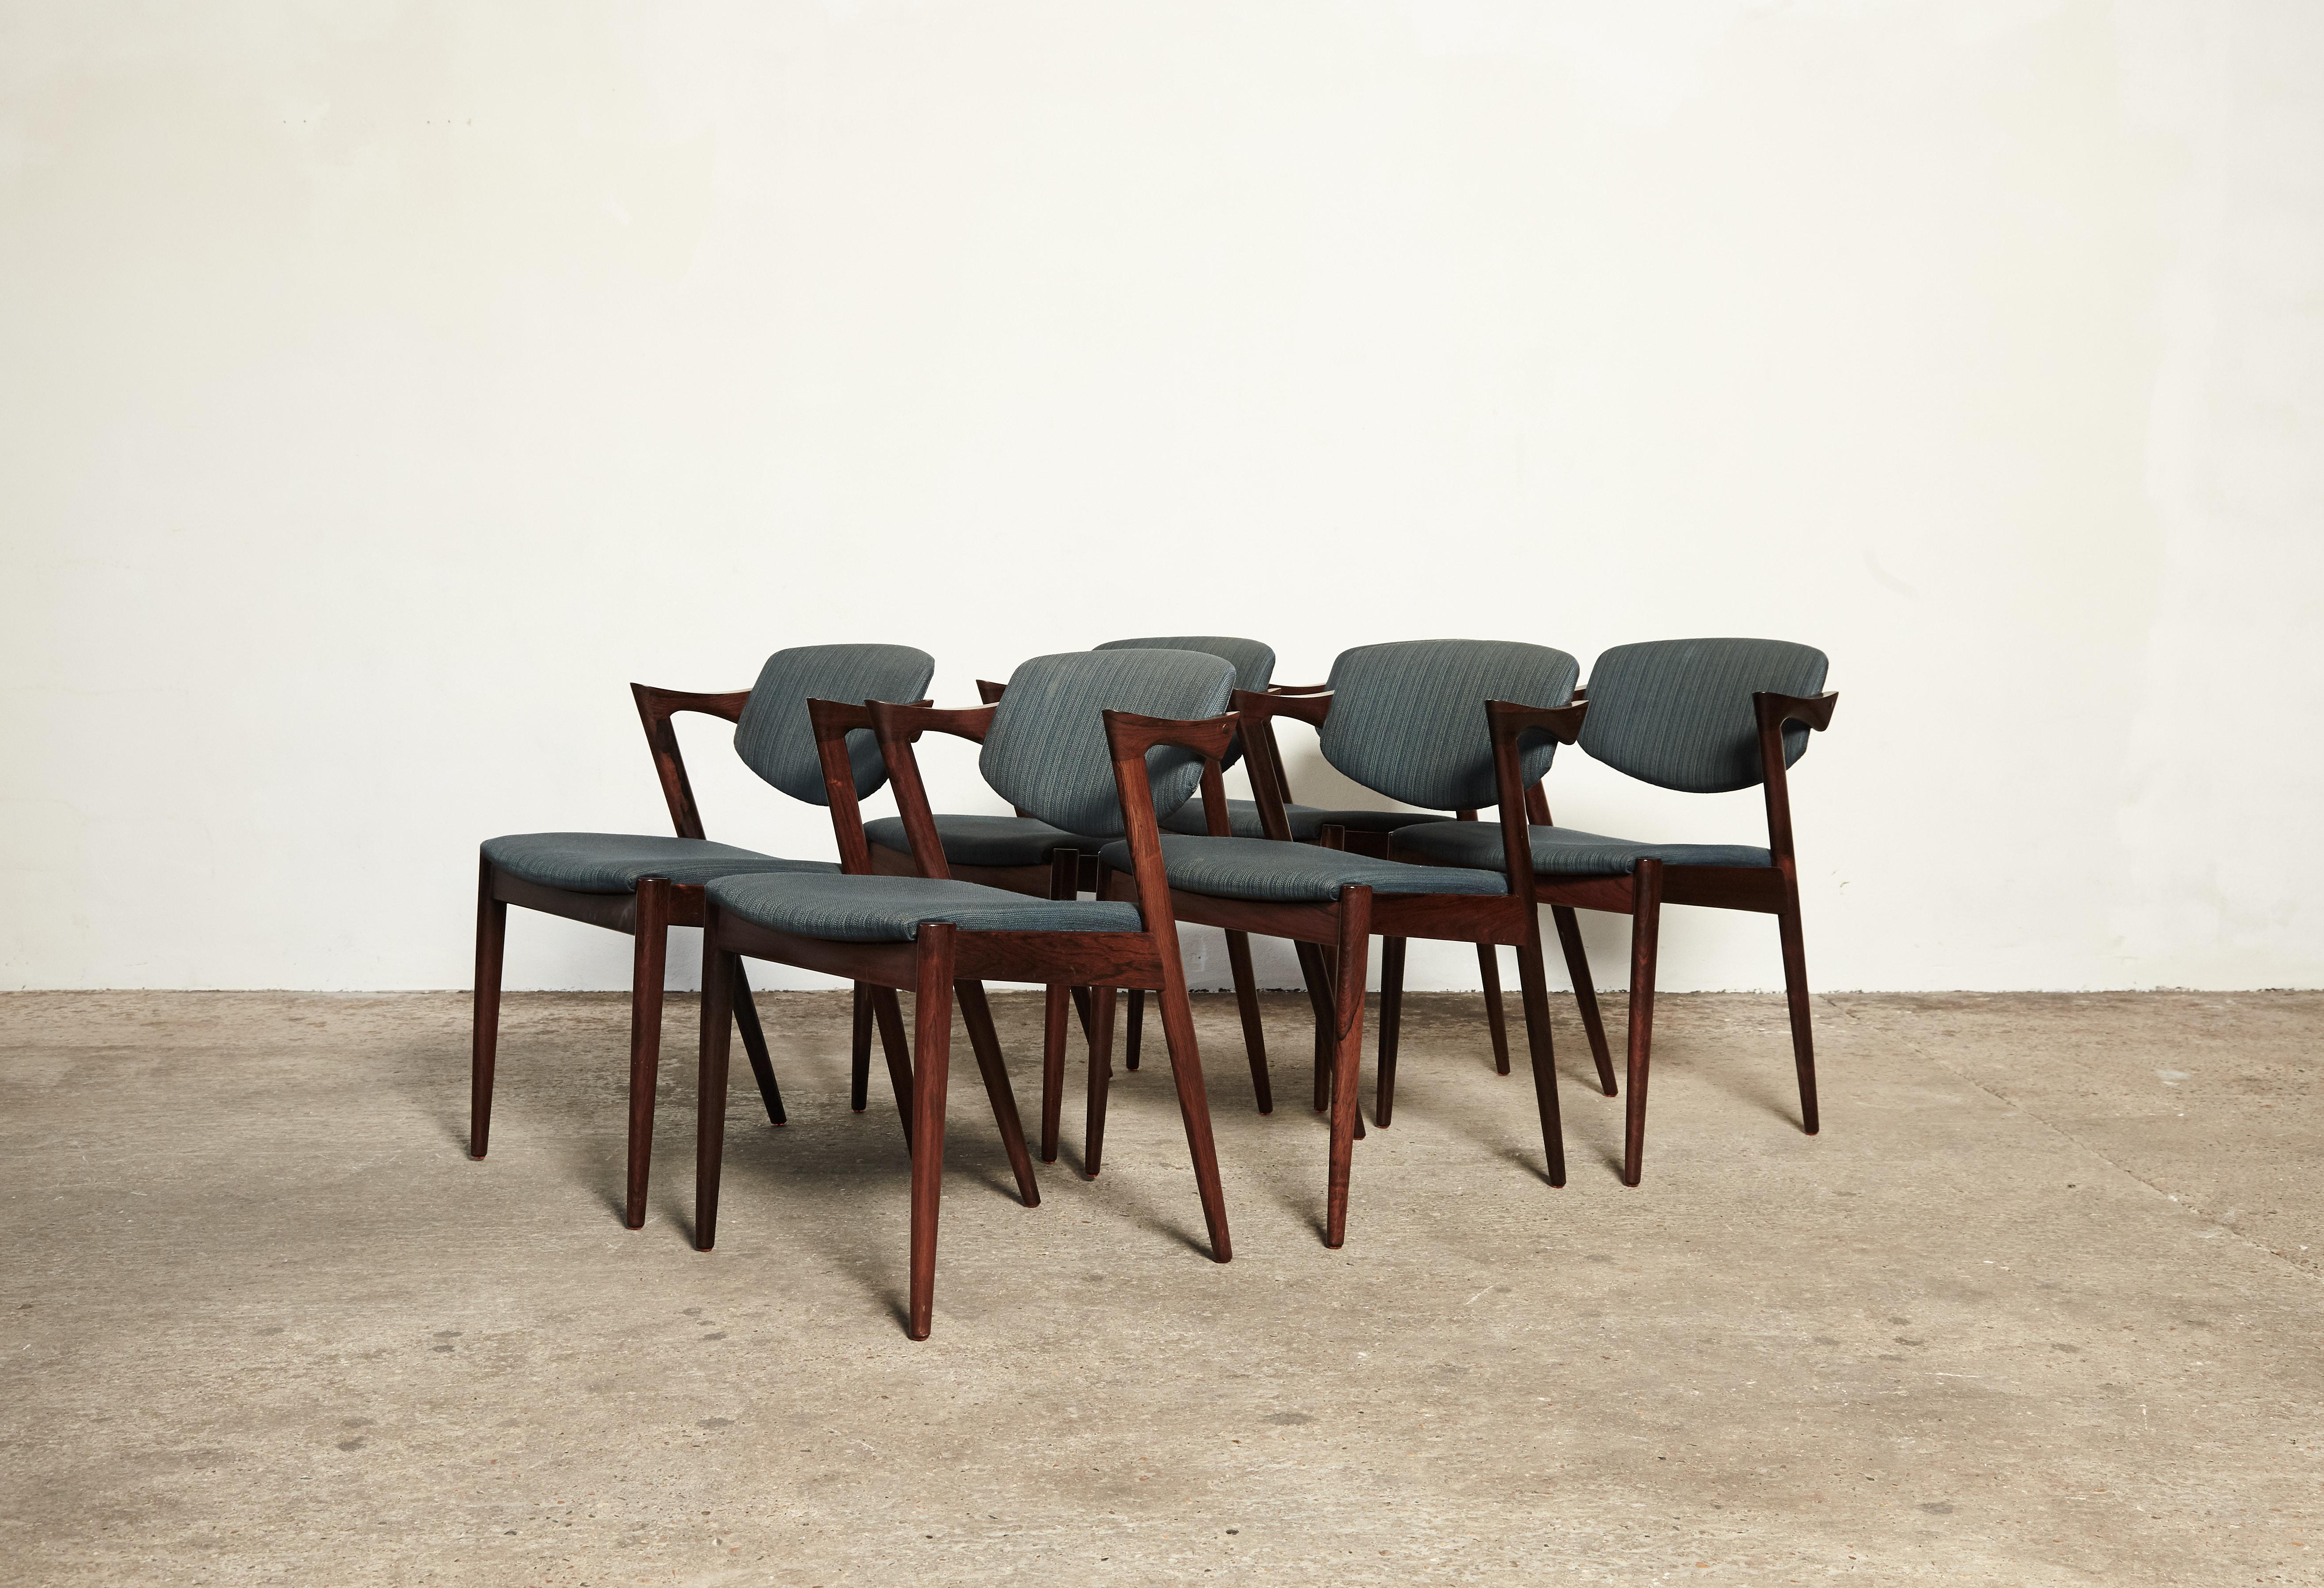 A set of six Model 42 rosewood dining chairs by Kai Kristiansen for Schou Andersen, Denmark. Tilting backrest. Original fabric seat covers - we offer a recovering service if you would like to replace the fabric. Very good condition. Ships worldwide